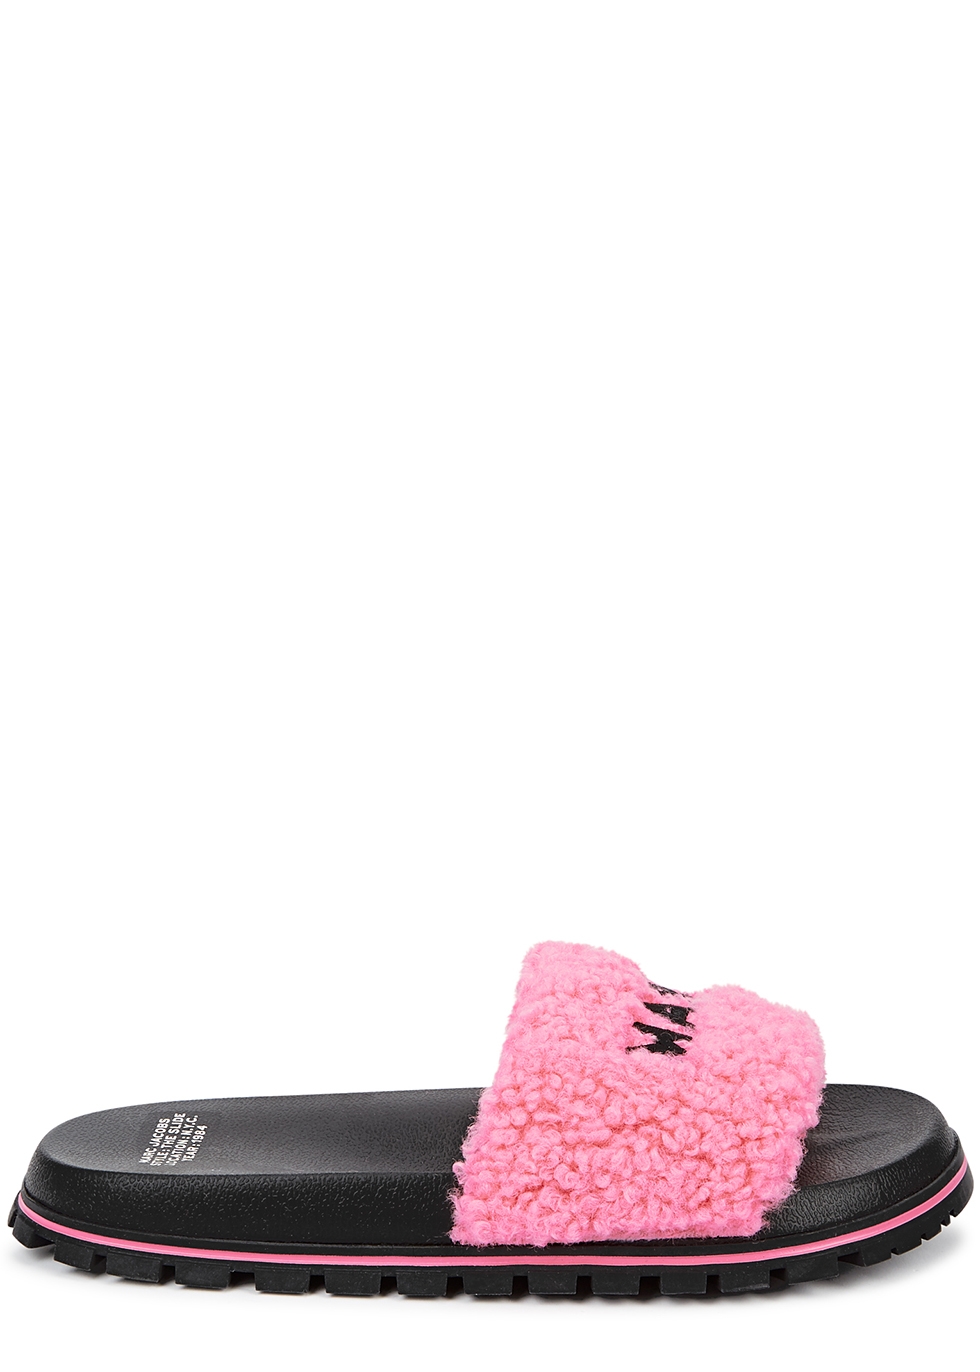 Marc Jacobs The Slide logo faux shearling sliders